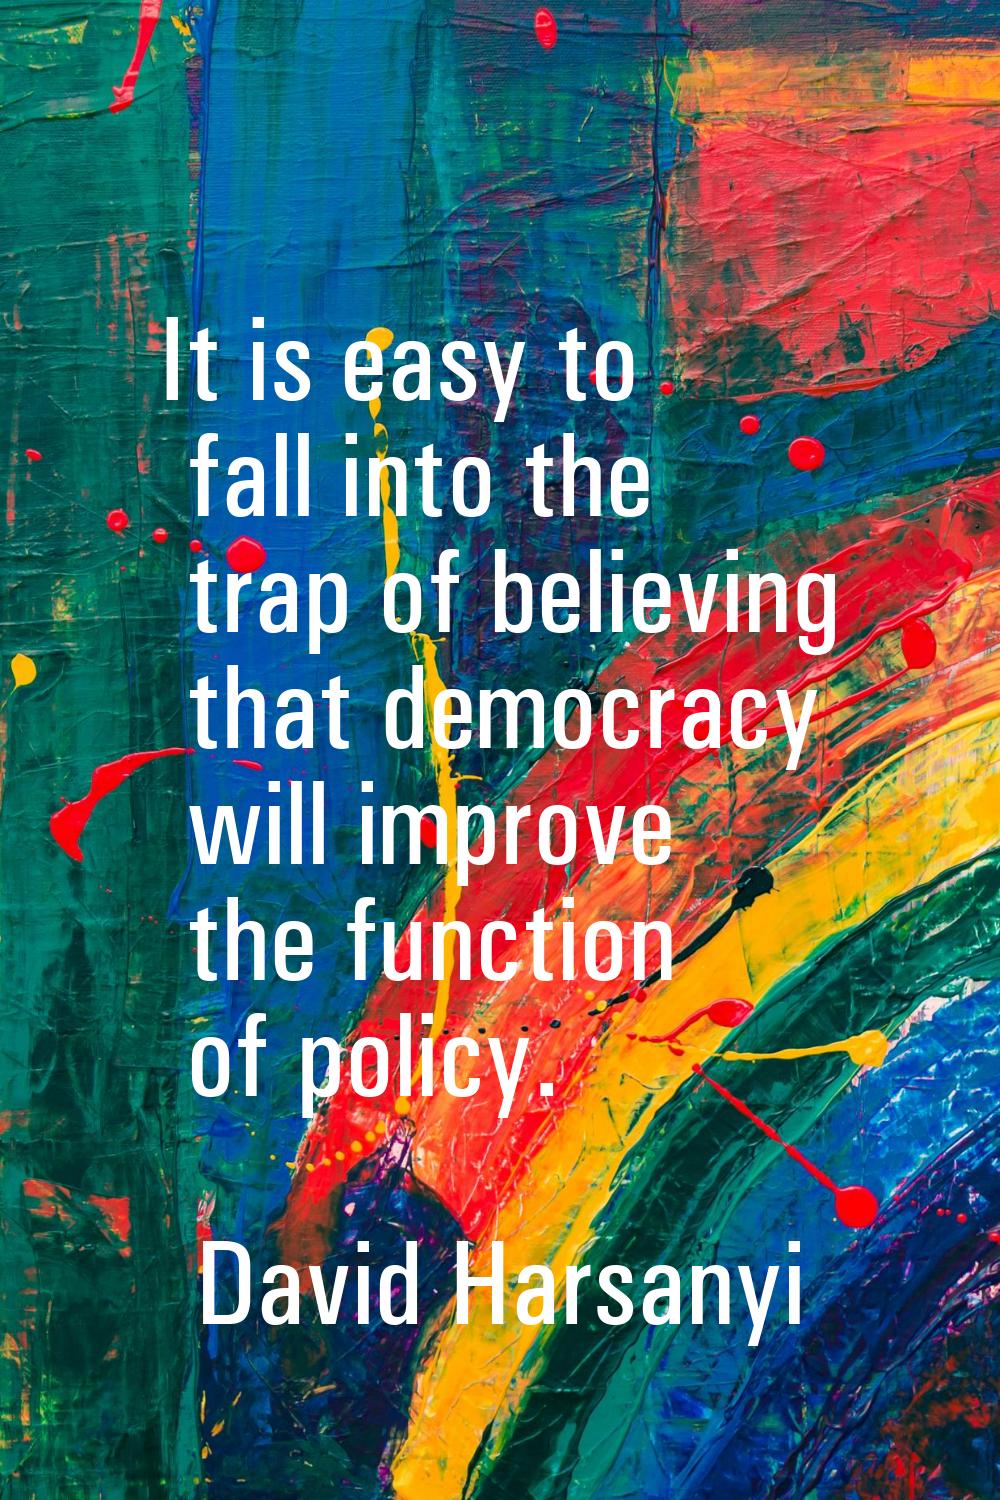 It is easy to fall into the trap of believing that democracy will improve the function of policy.